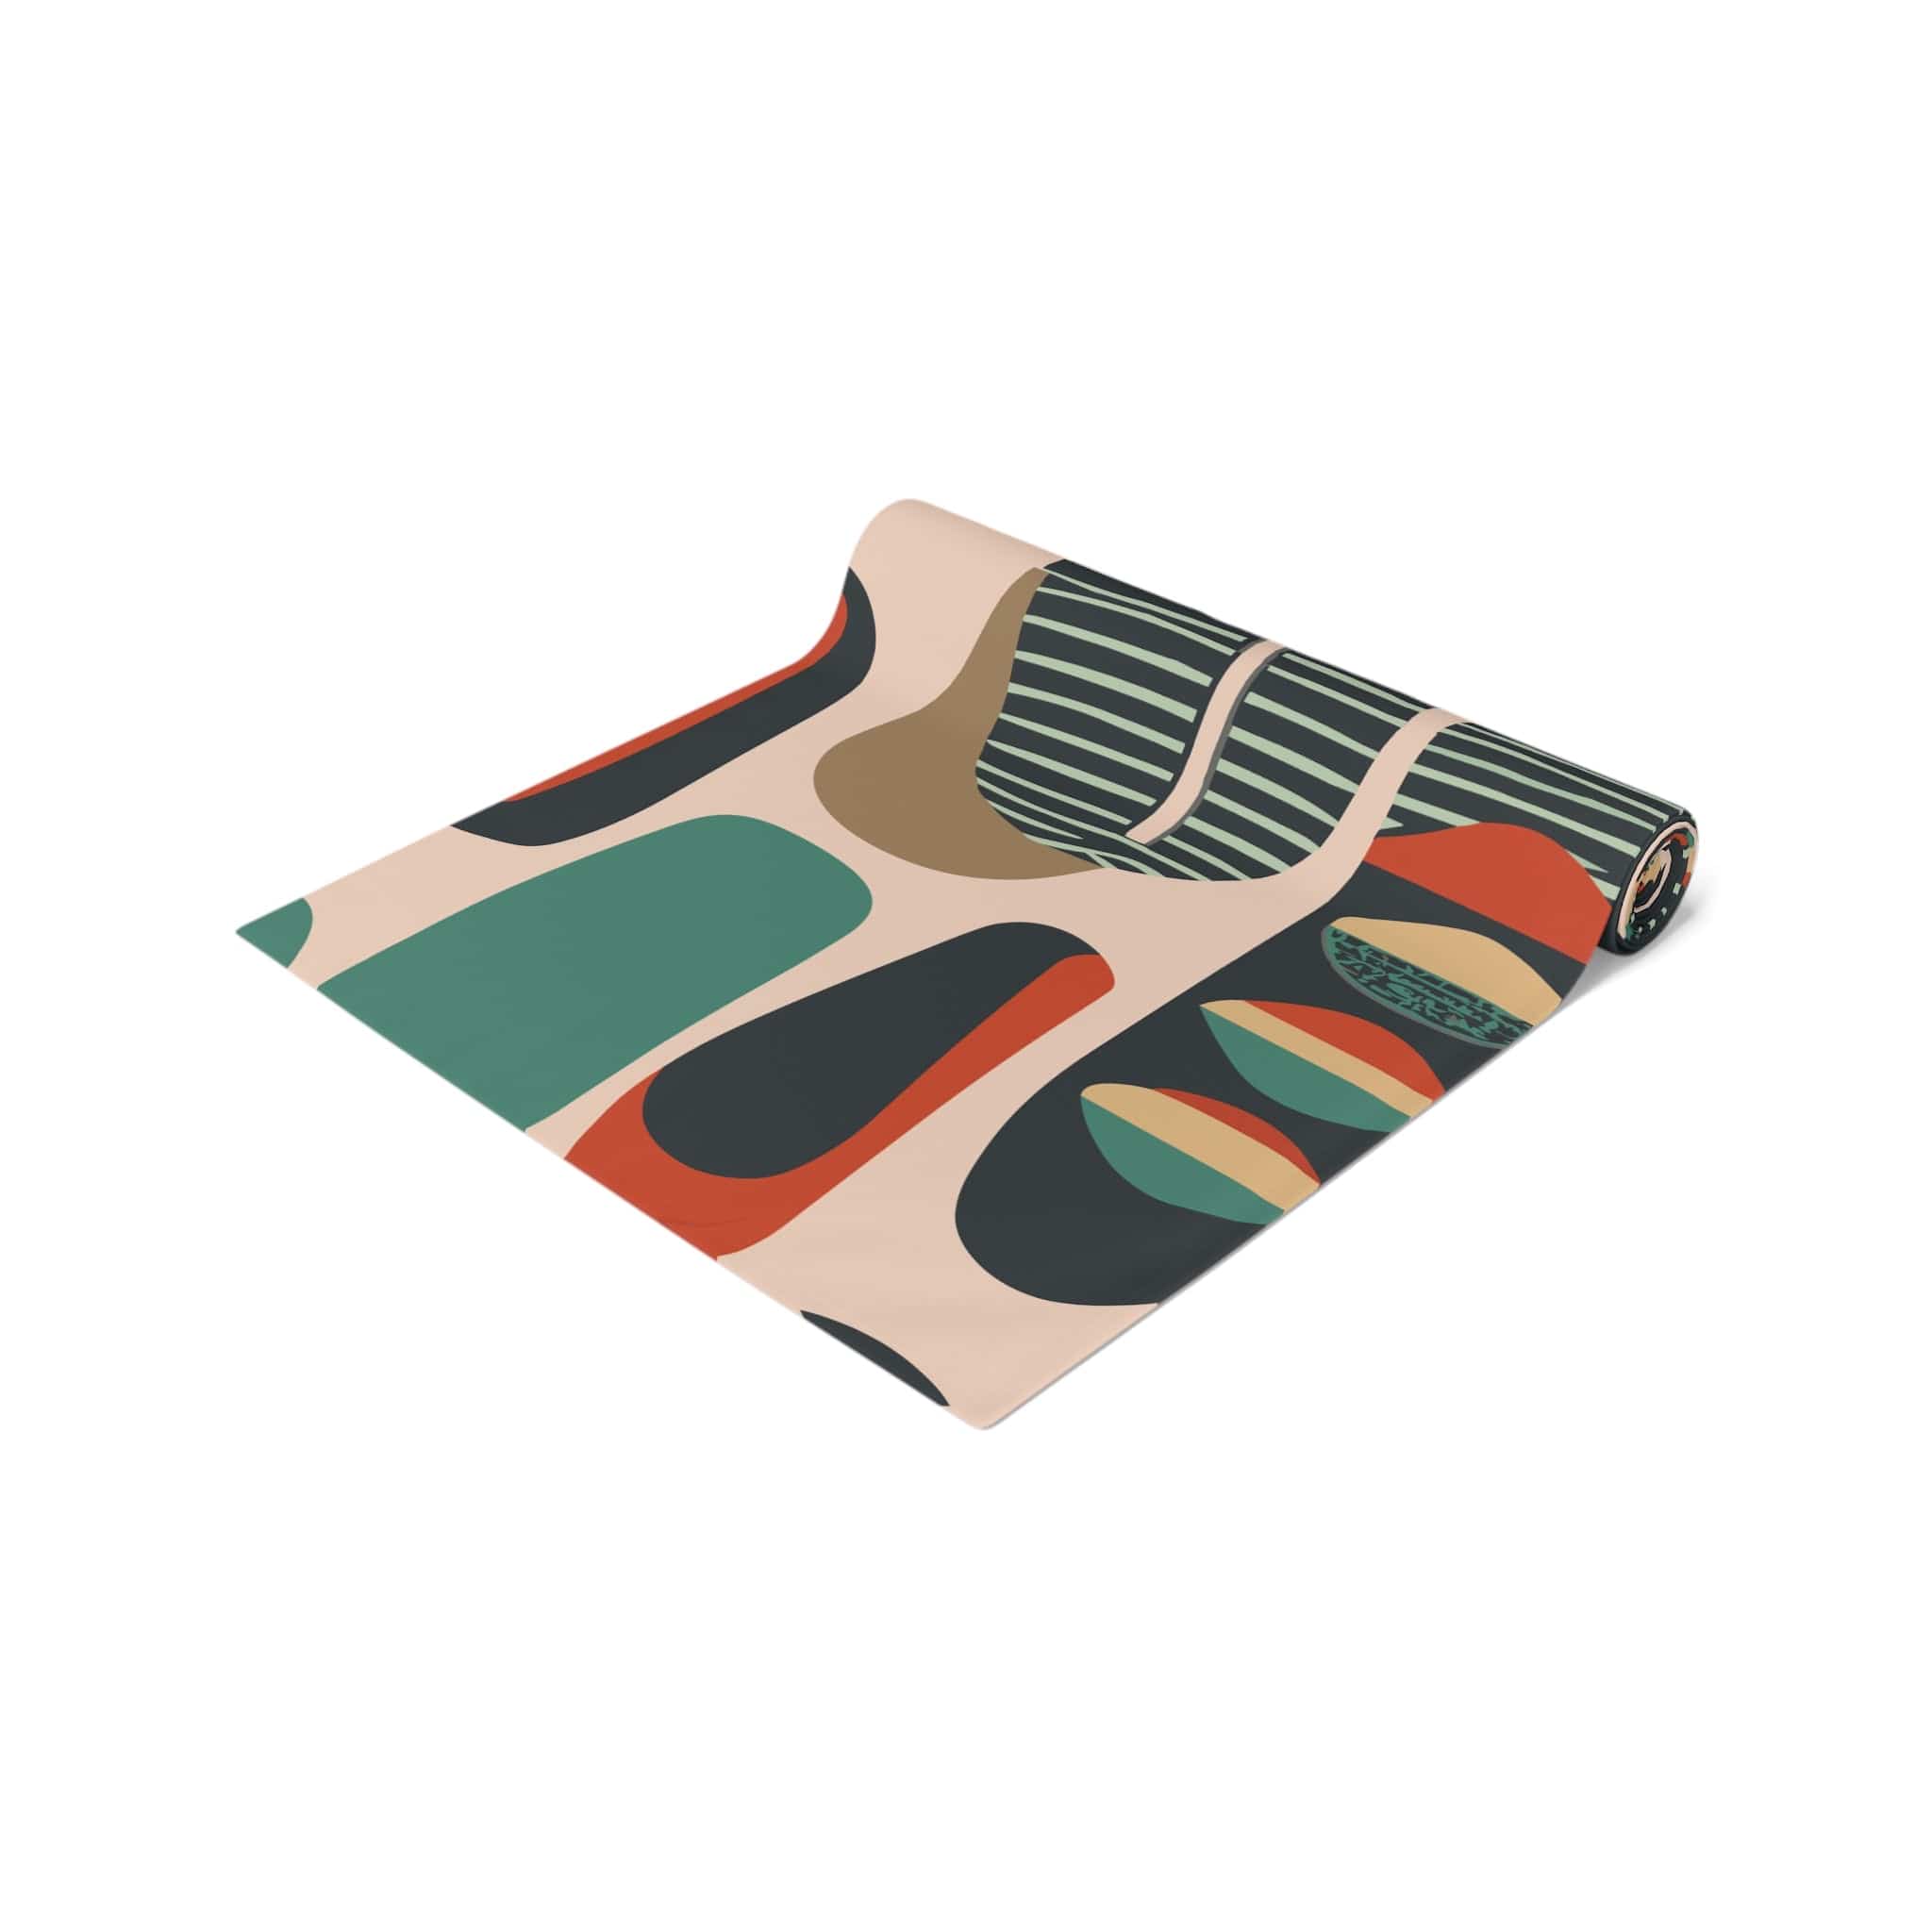 Kate McEnroe New York Retro Mod Table Runner, MCM Geometric Dining Decor, Abstract Shapes Table Linen, Mid Century Modern Table AccessoryTable Runners27740386211055351155